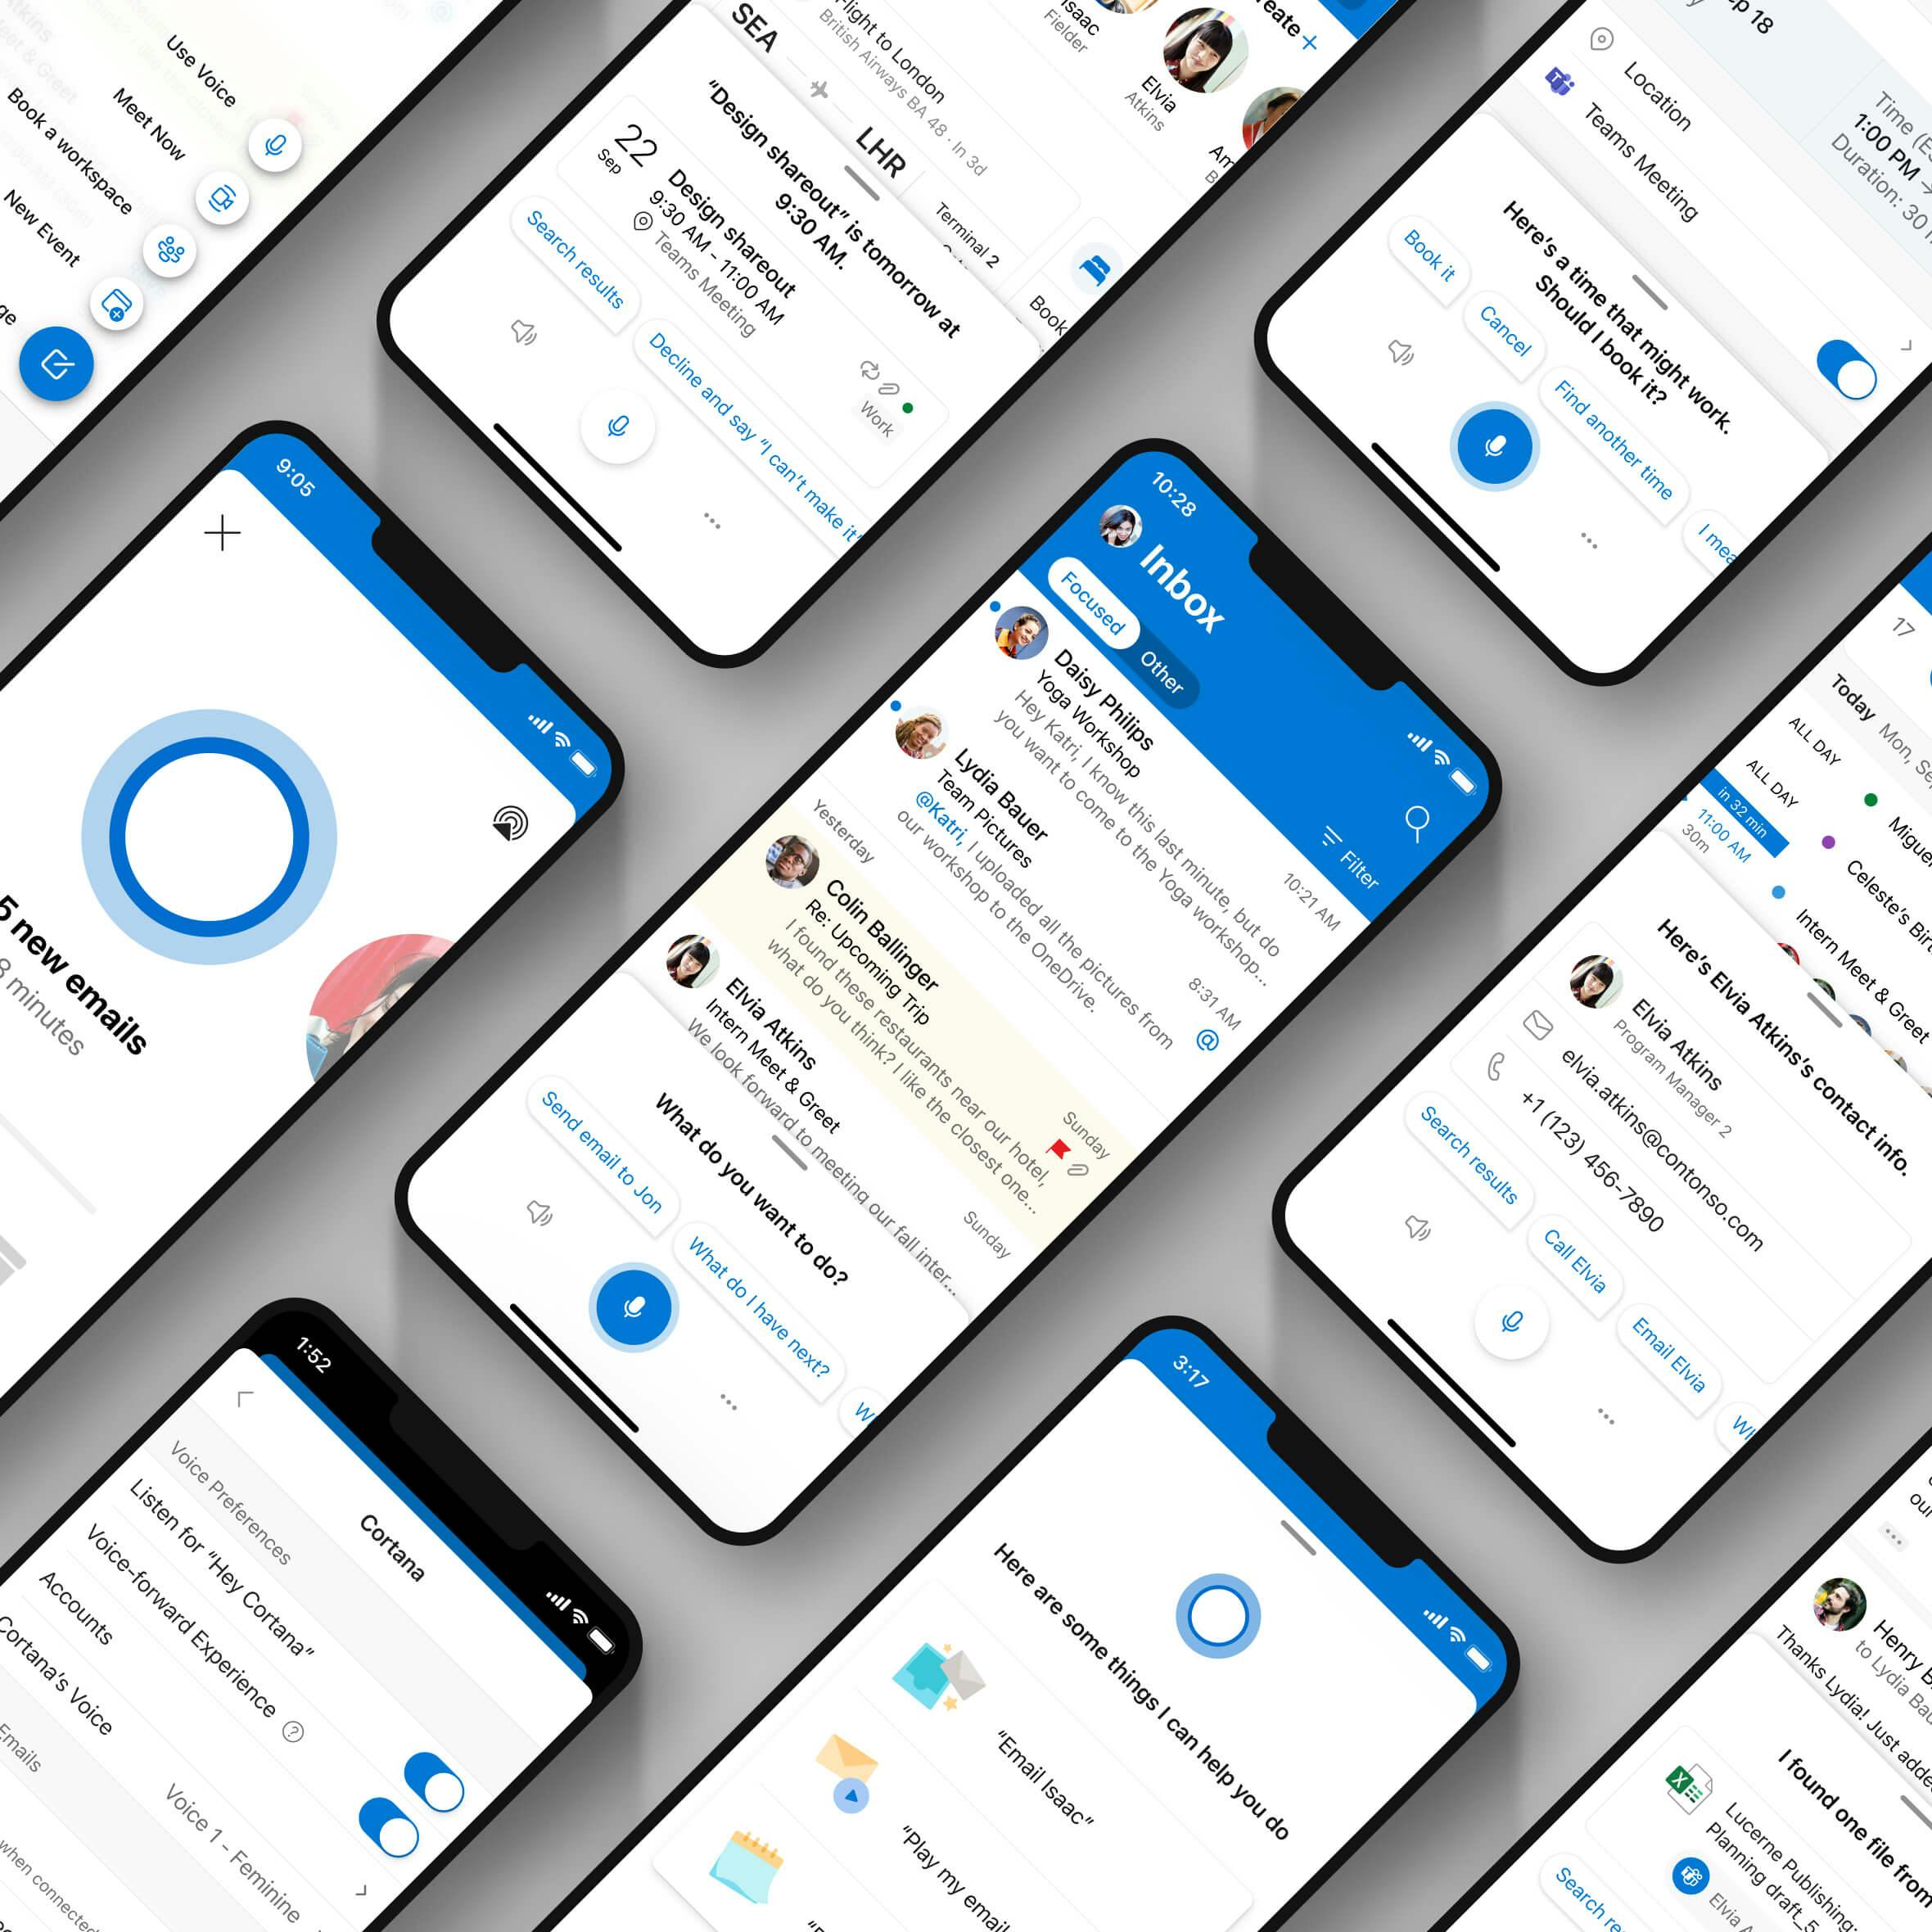 An array of devices displayed side by side, each showcasing a different feature of Cortanas integration with the Outlook Mobile app. The screens highlight the voice assistants diverse capabilities in managing both email and calendar-related tasks.